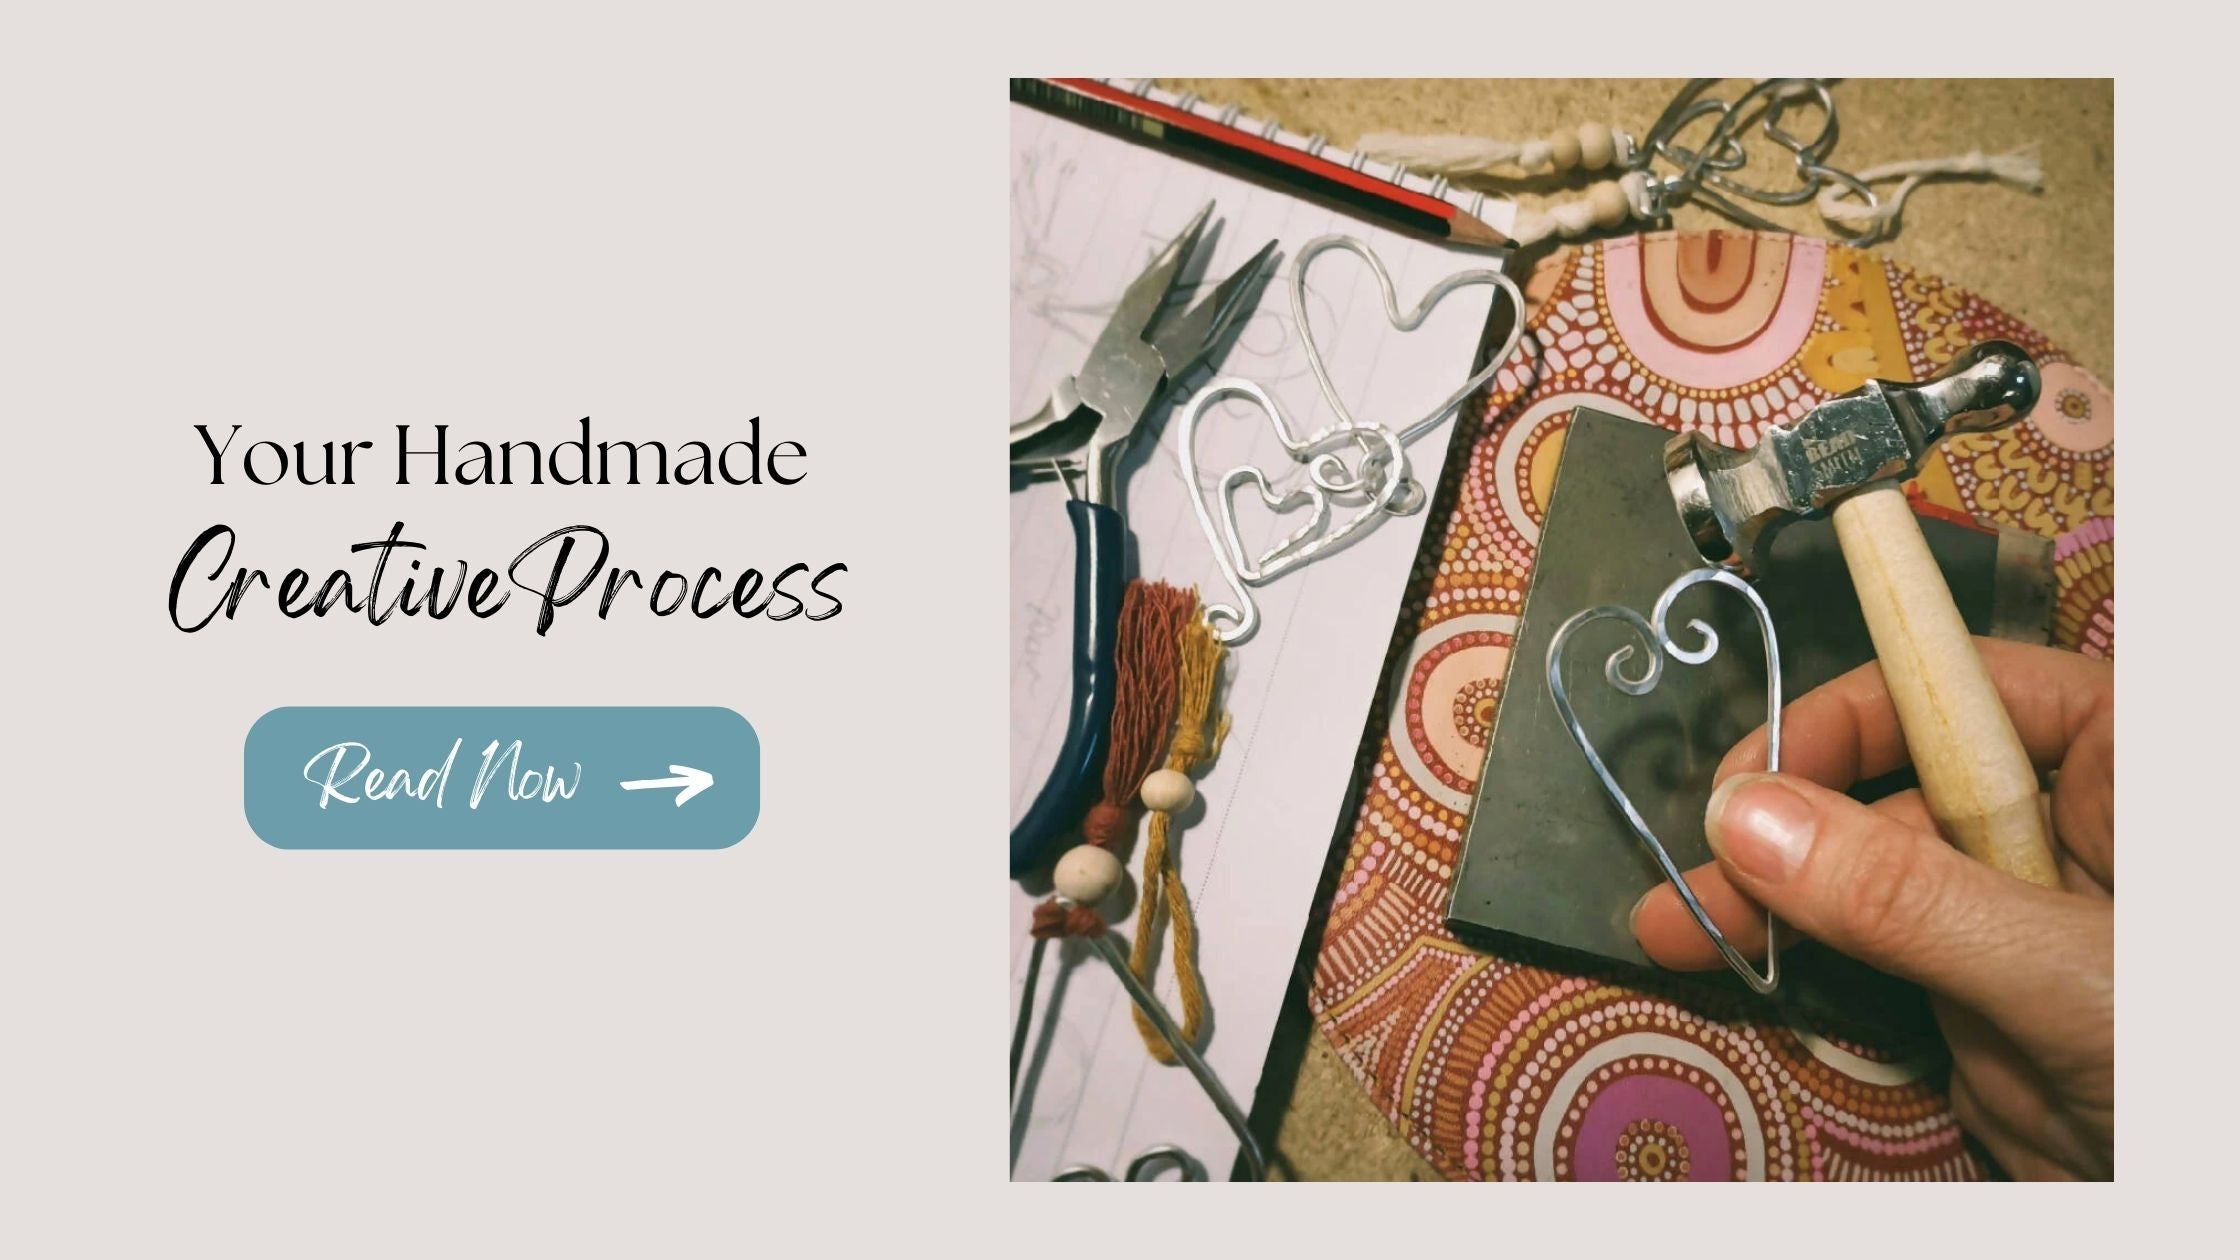 Details about your Handmade Process